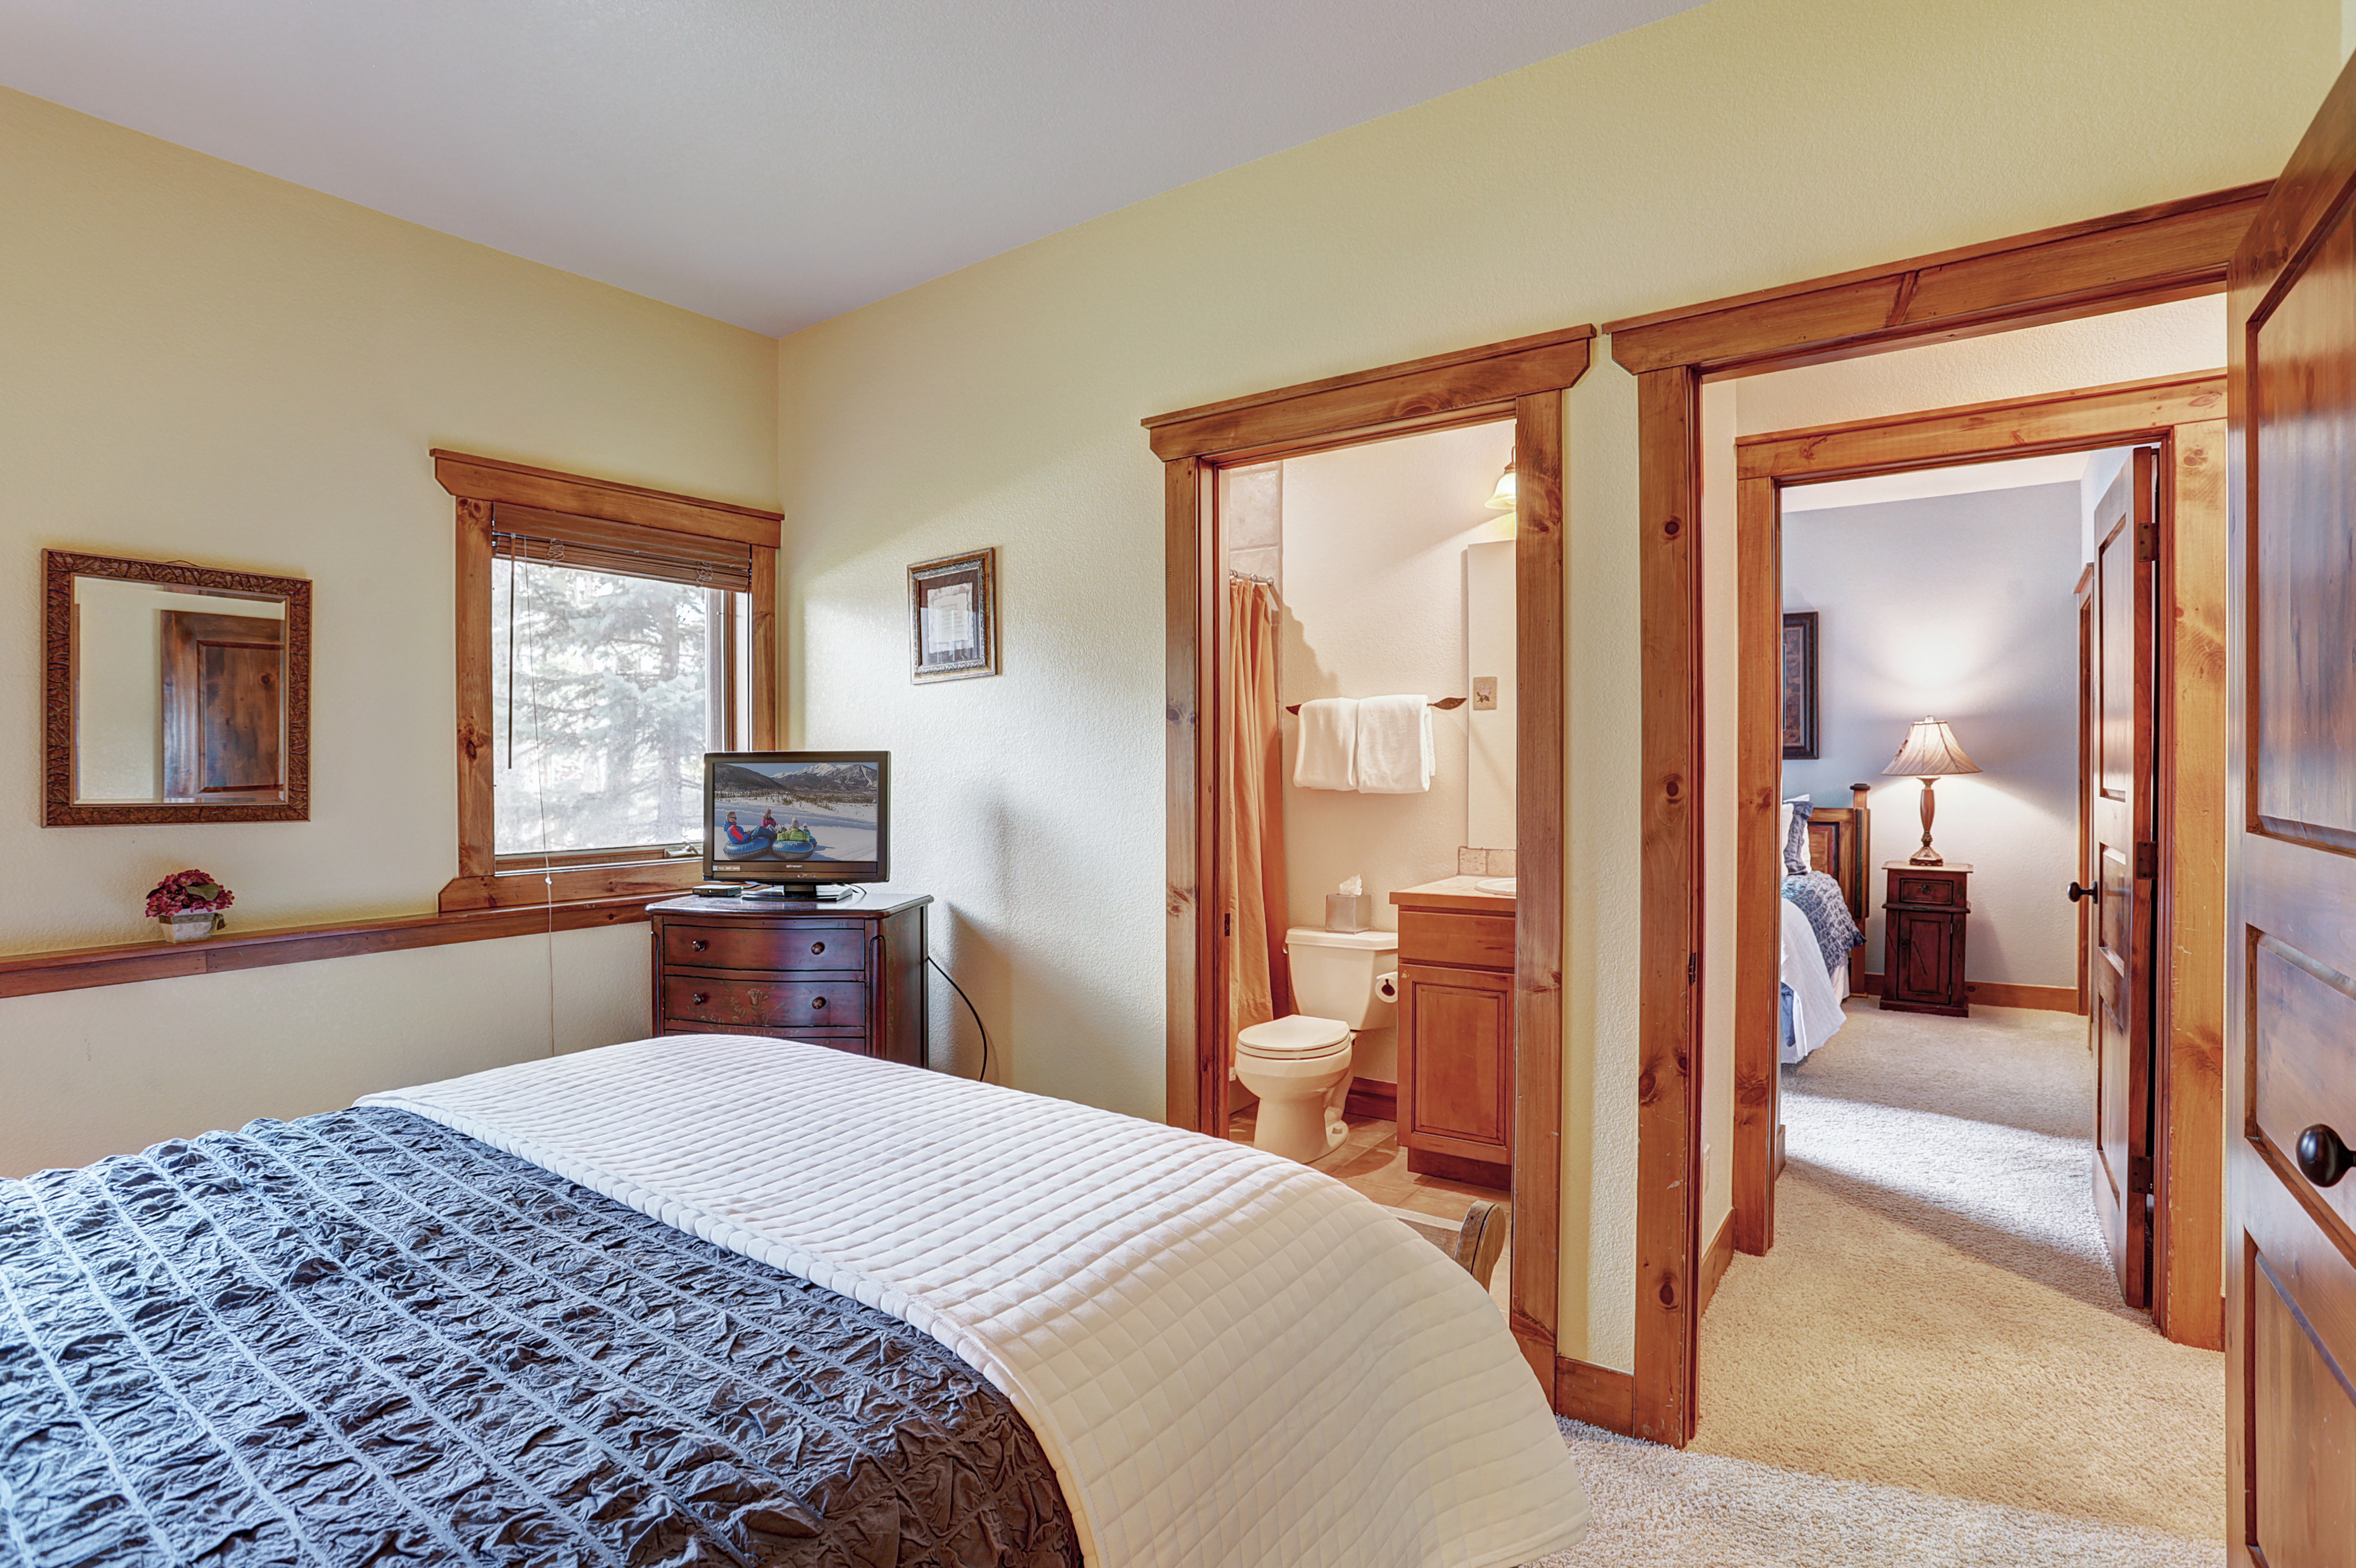 Enjoy relaxing mornings and evenings with natural light and great views - Amber Sky Breckenridge Vacation Rental